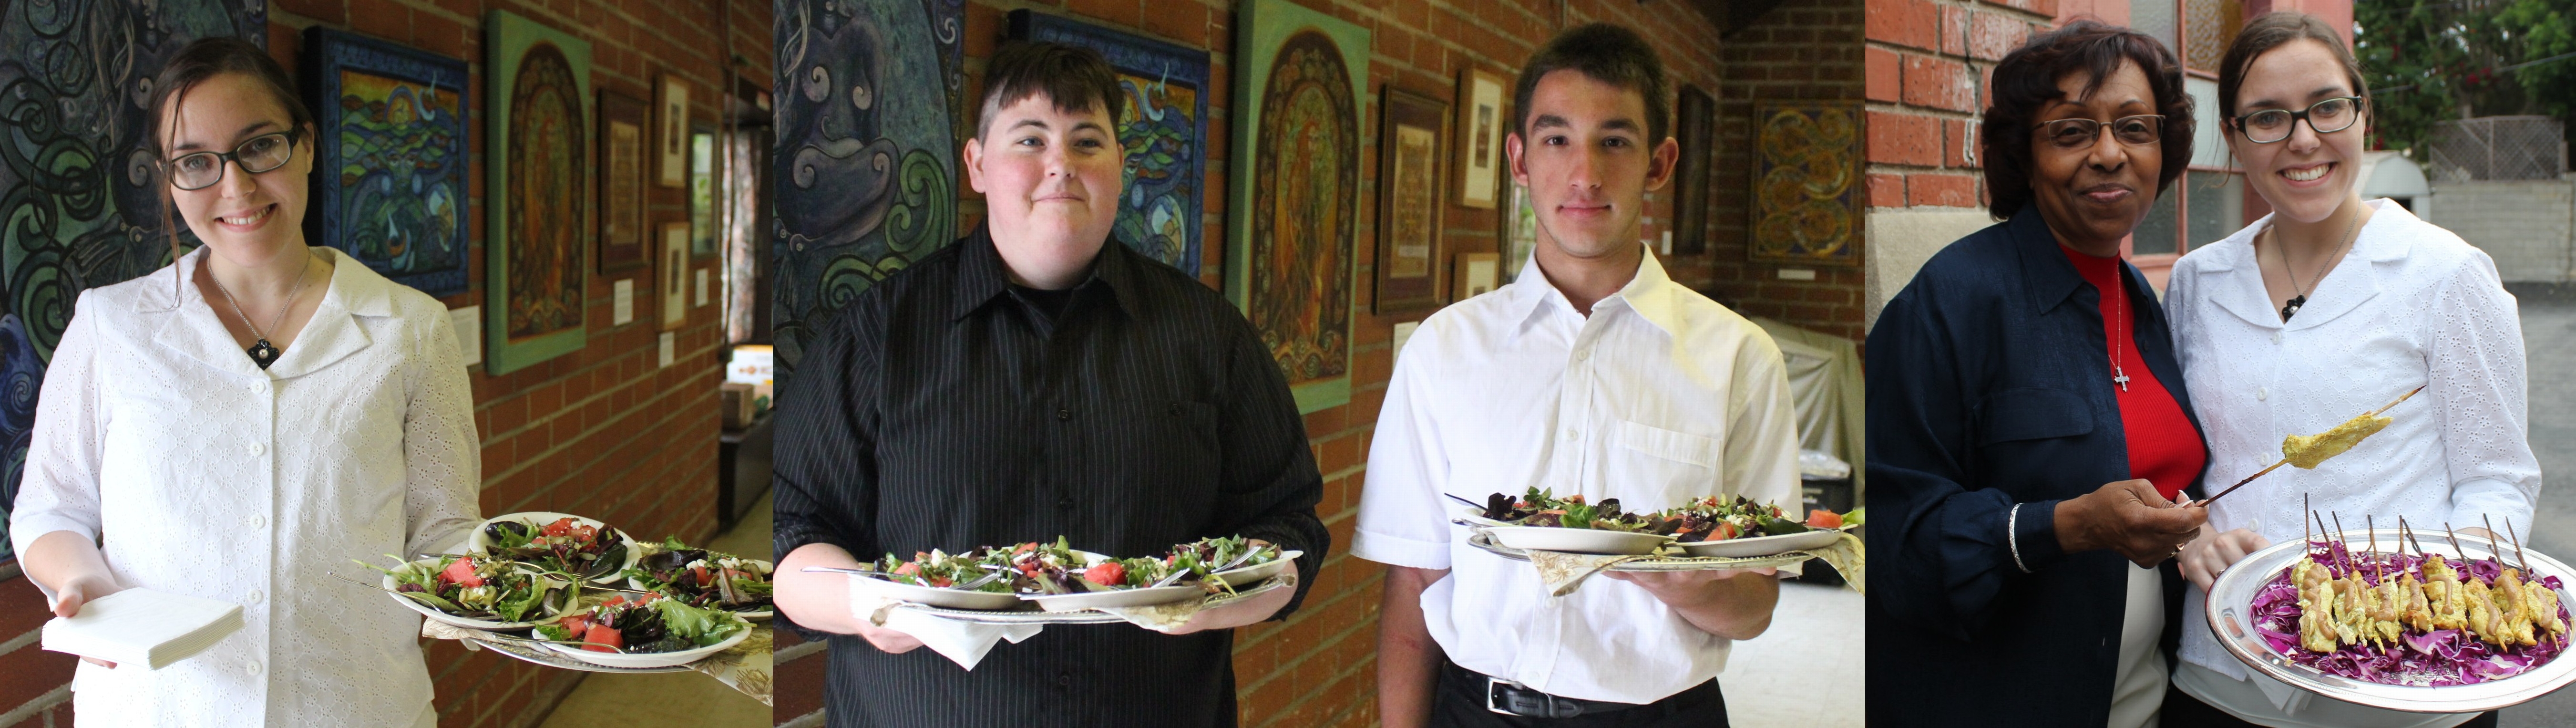 Our servers - Maureen, Eli and Olig along with Deacon Margaret